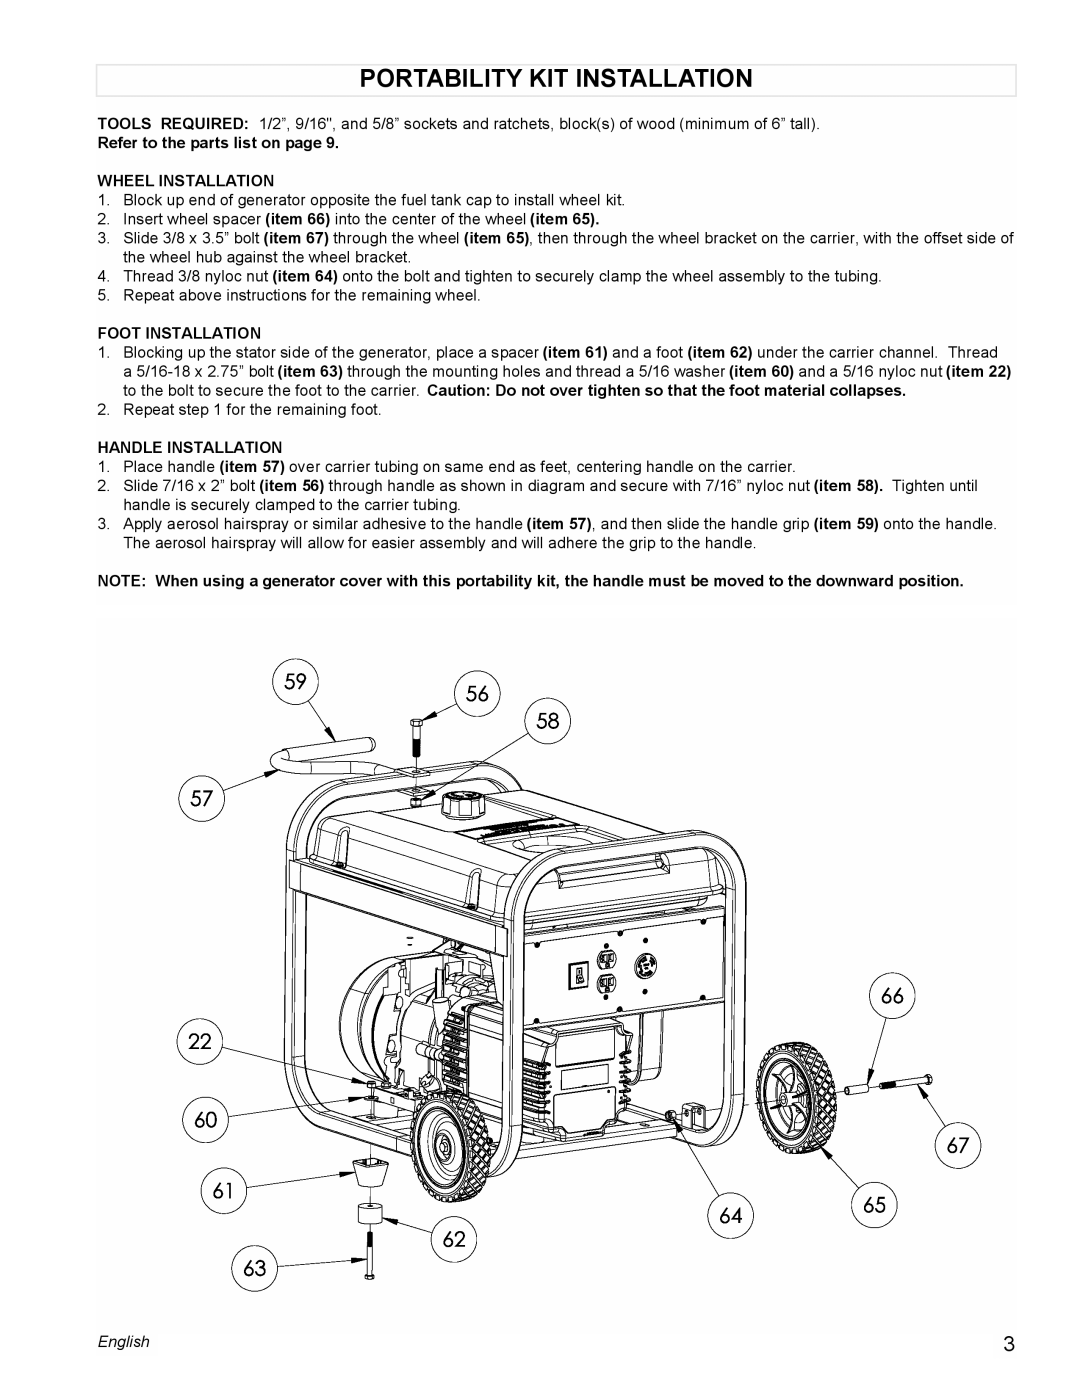 Powermate PC0545006 Portability Kit Installation, Refer to the parts list on page, Wheel Installation, Foot Installation 